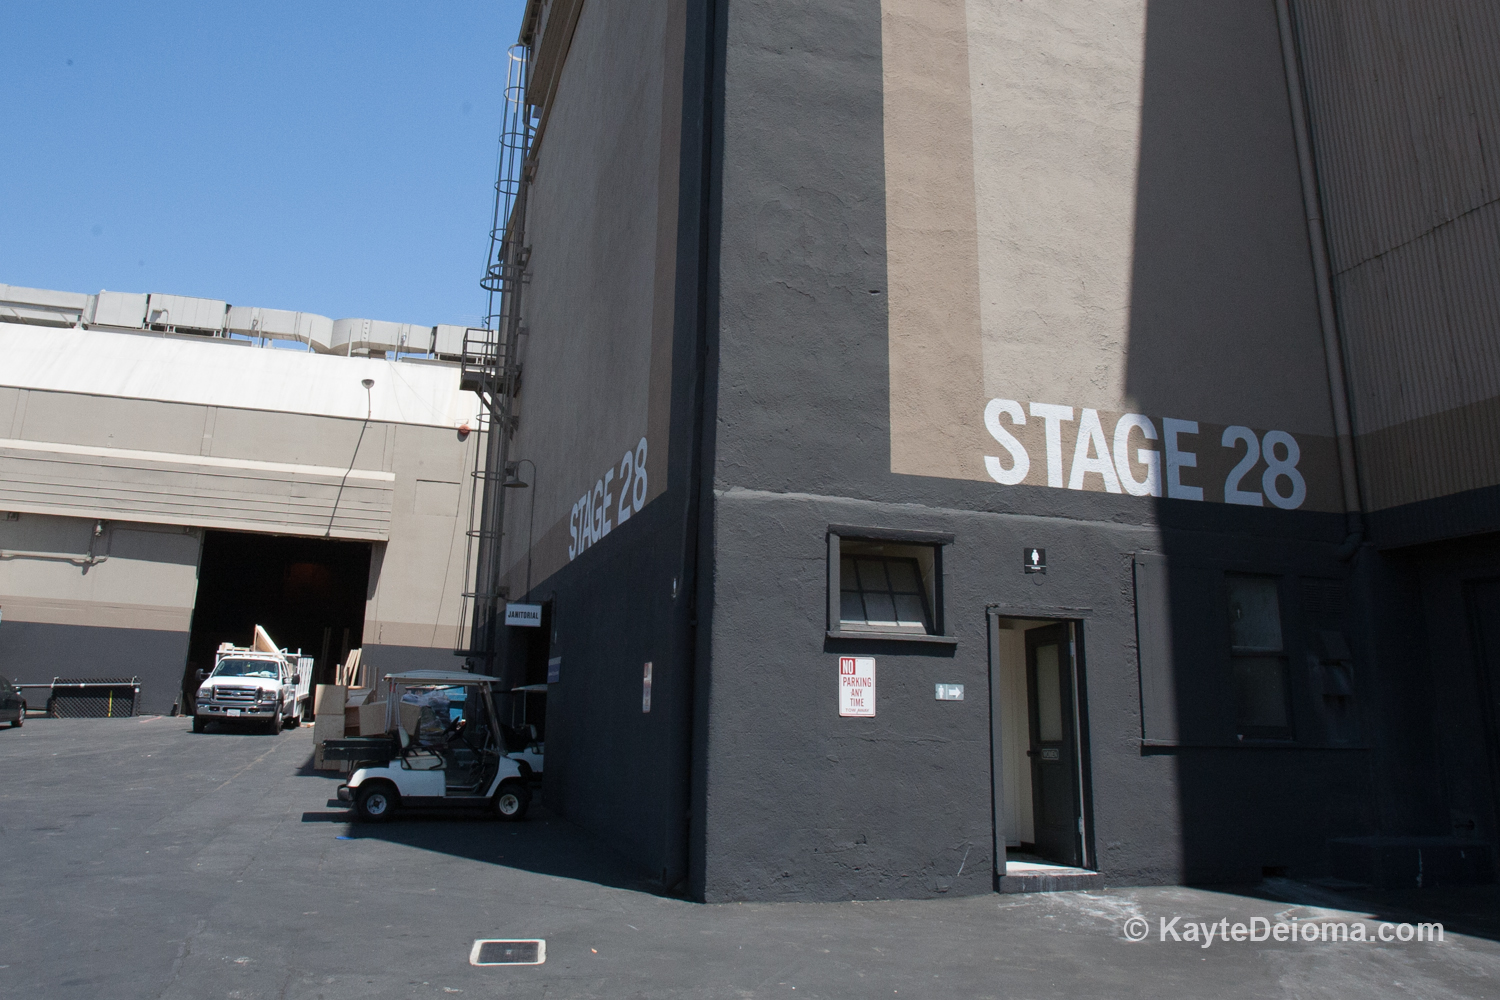 Stage 28 at Universal Studios Hollywood